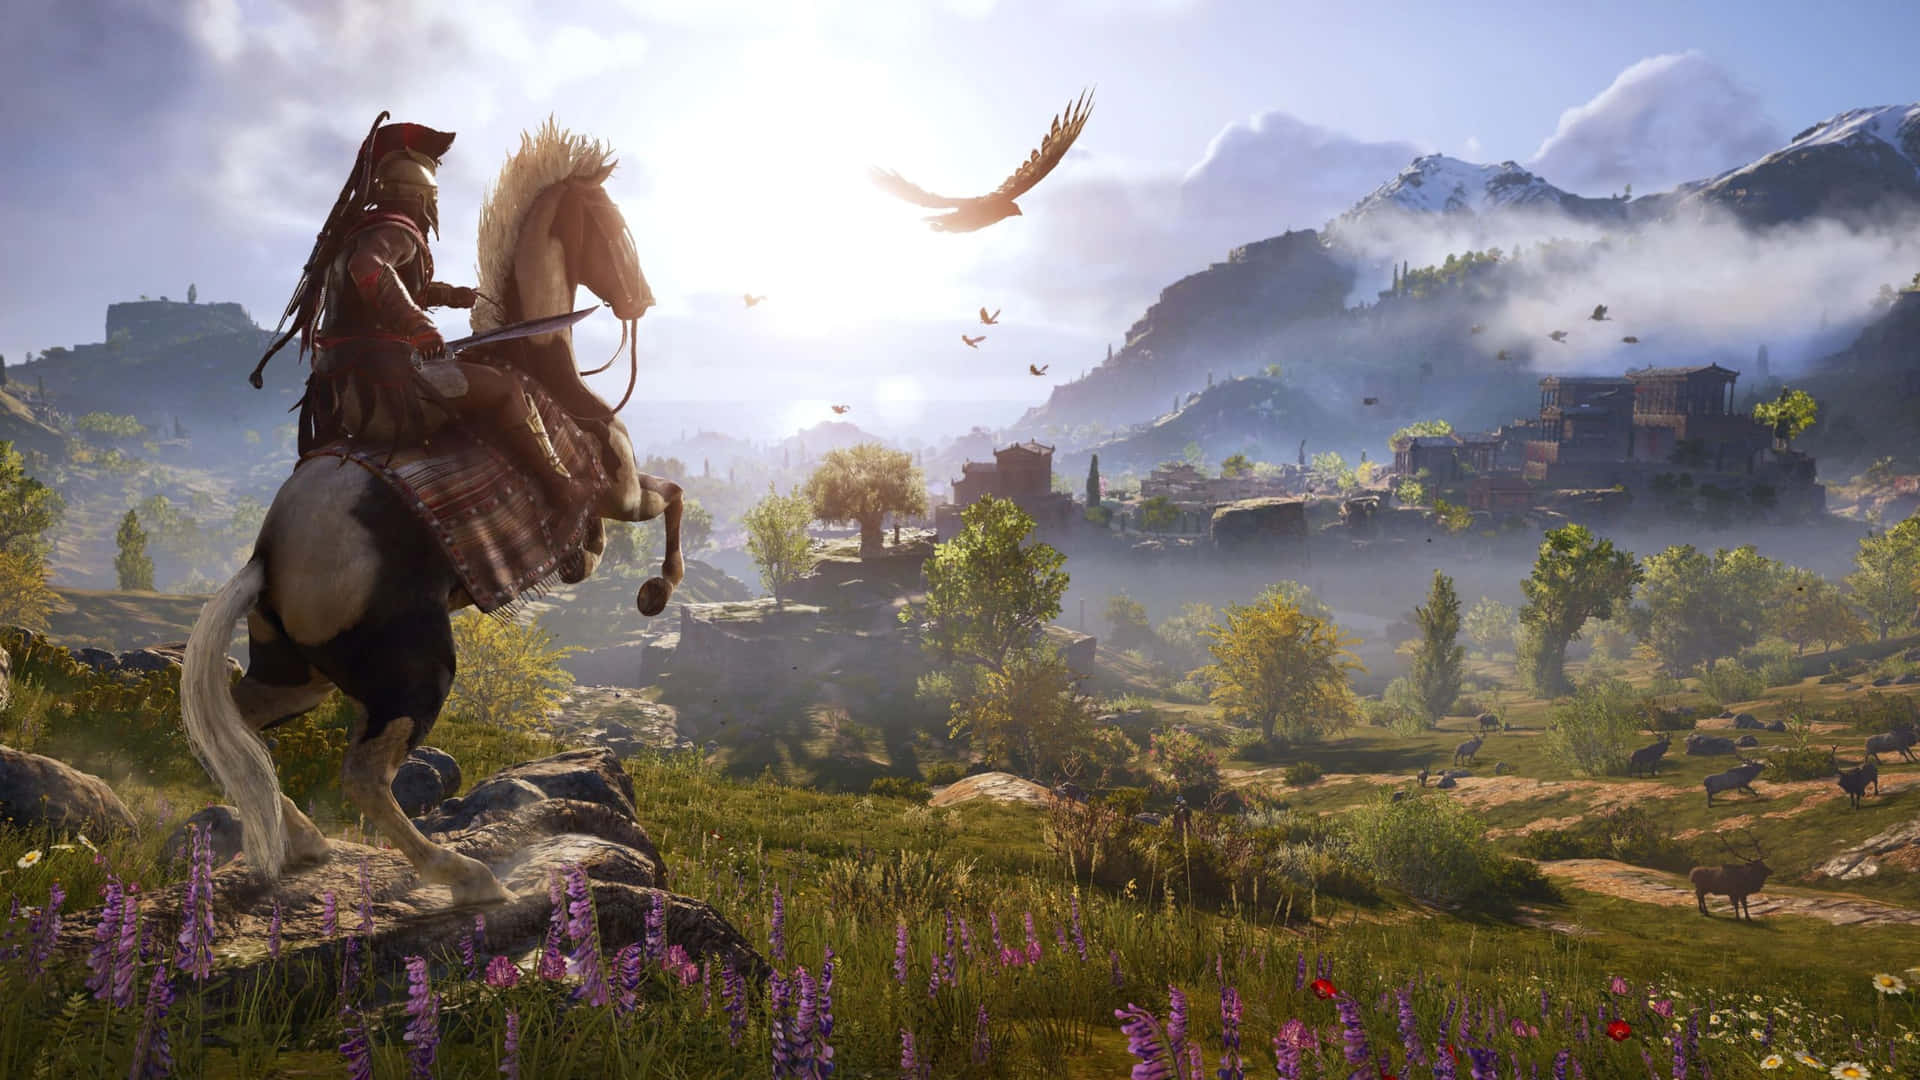 Beautiful Scenery 1440p Assassin's Creed Odyssey Background